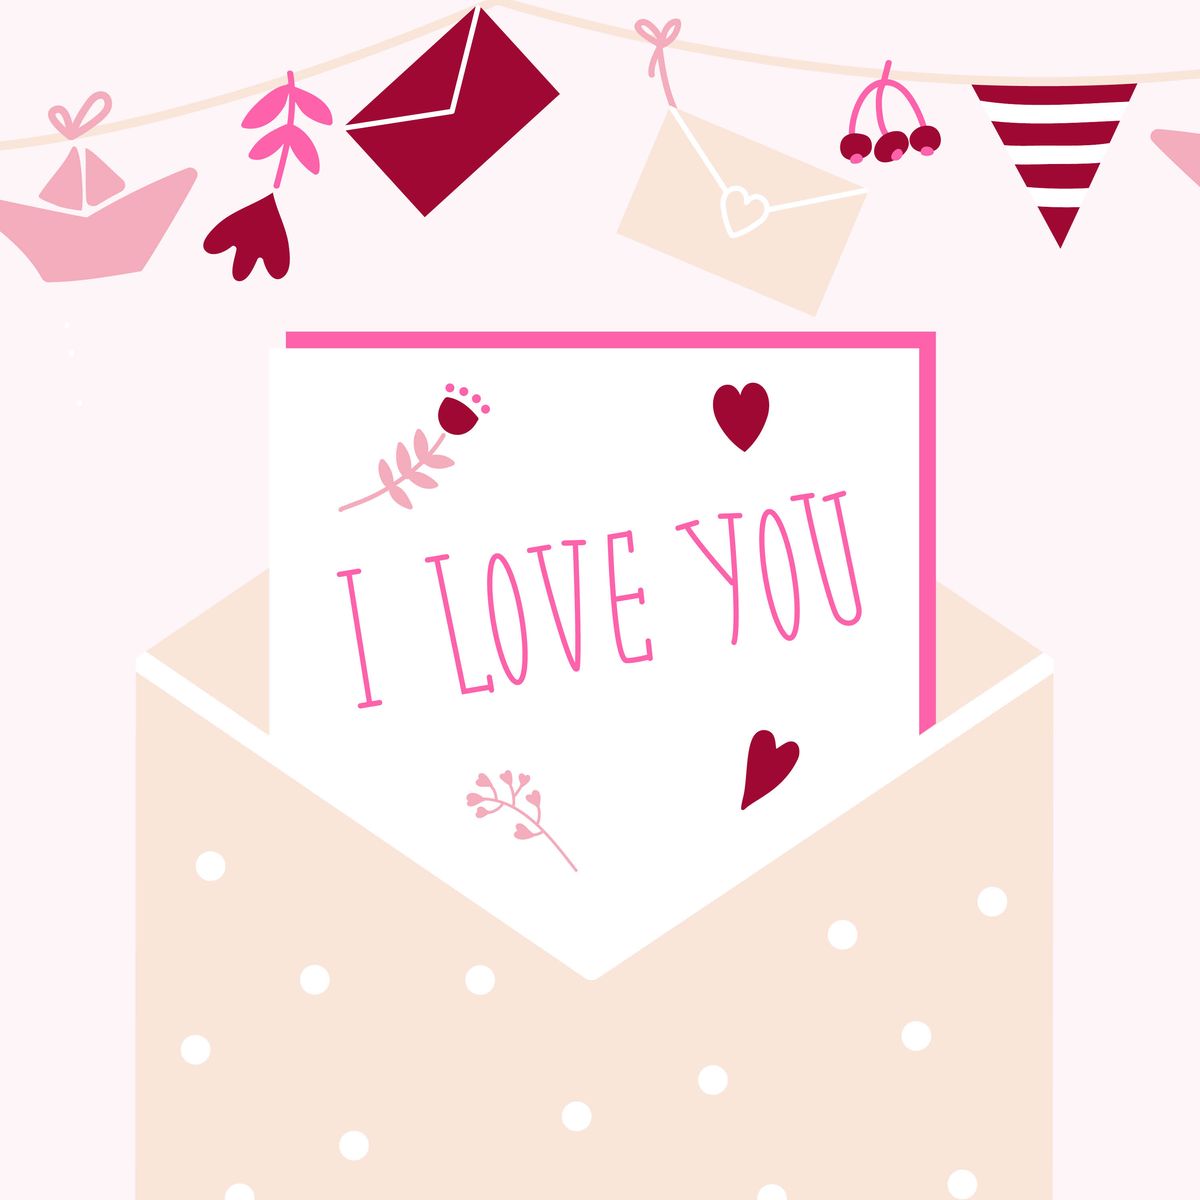 How to Write a Love Letter - 12 Steps to Writing a Valentine